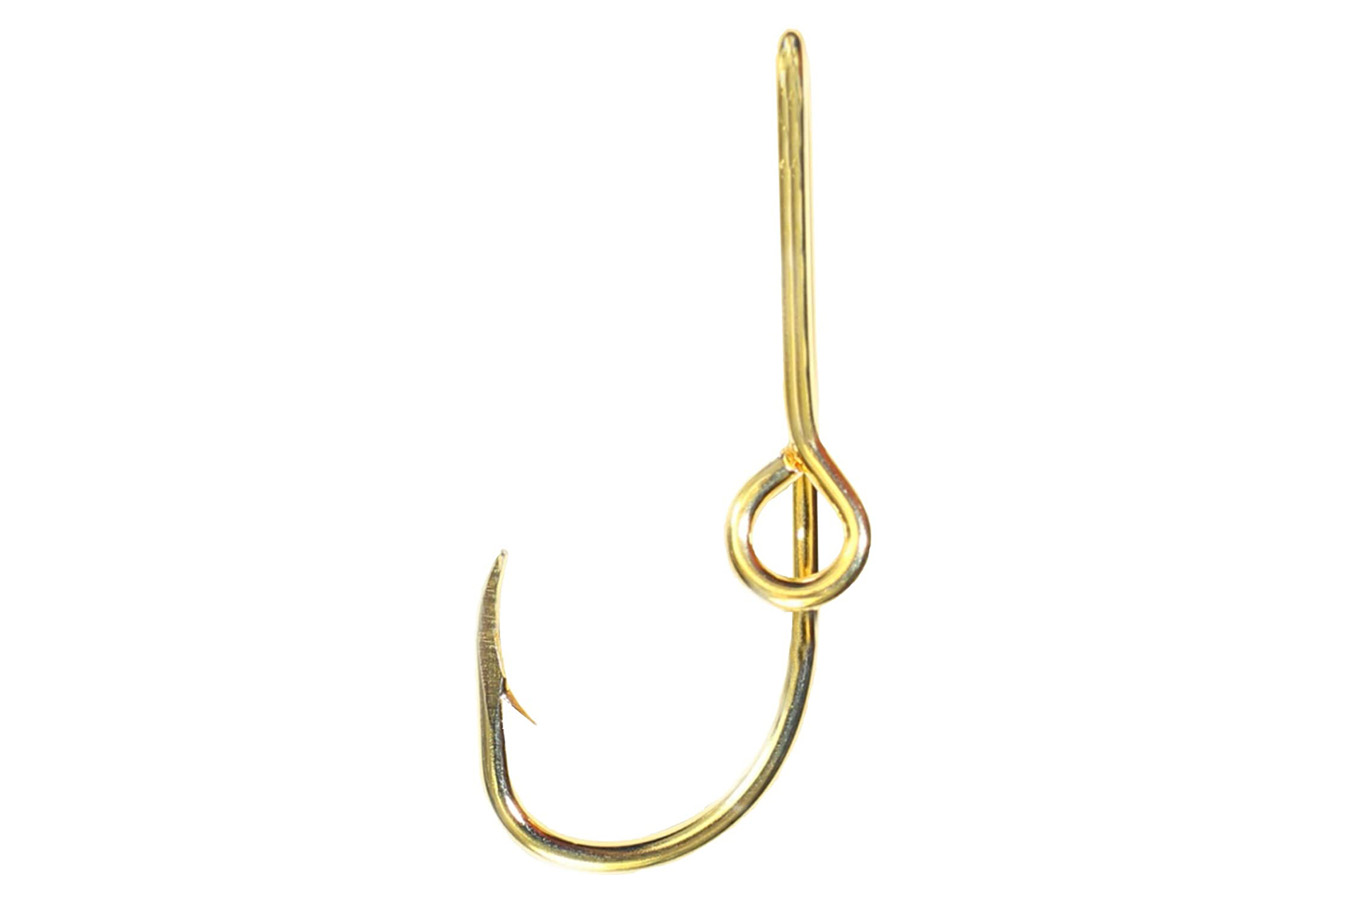 Eagle Claw Tie/Hat Clip - Hook for Sale